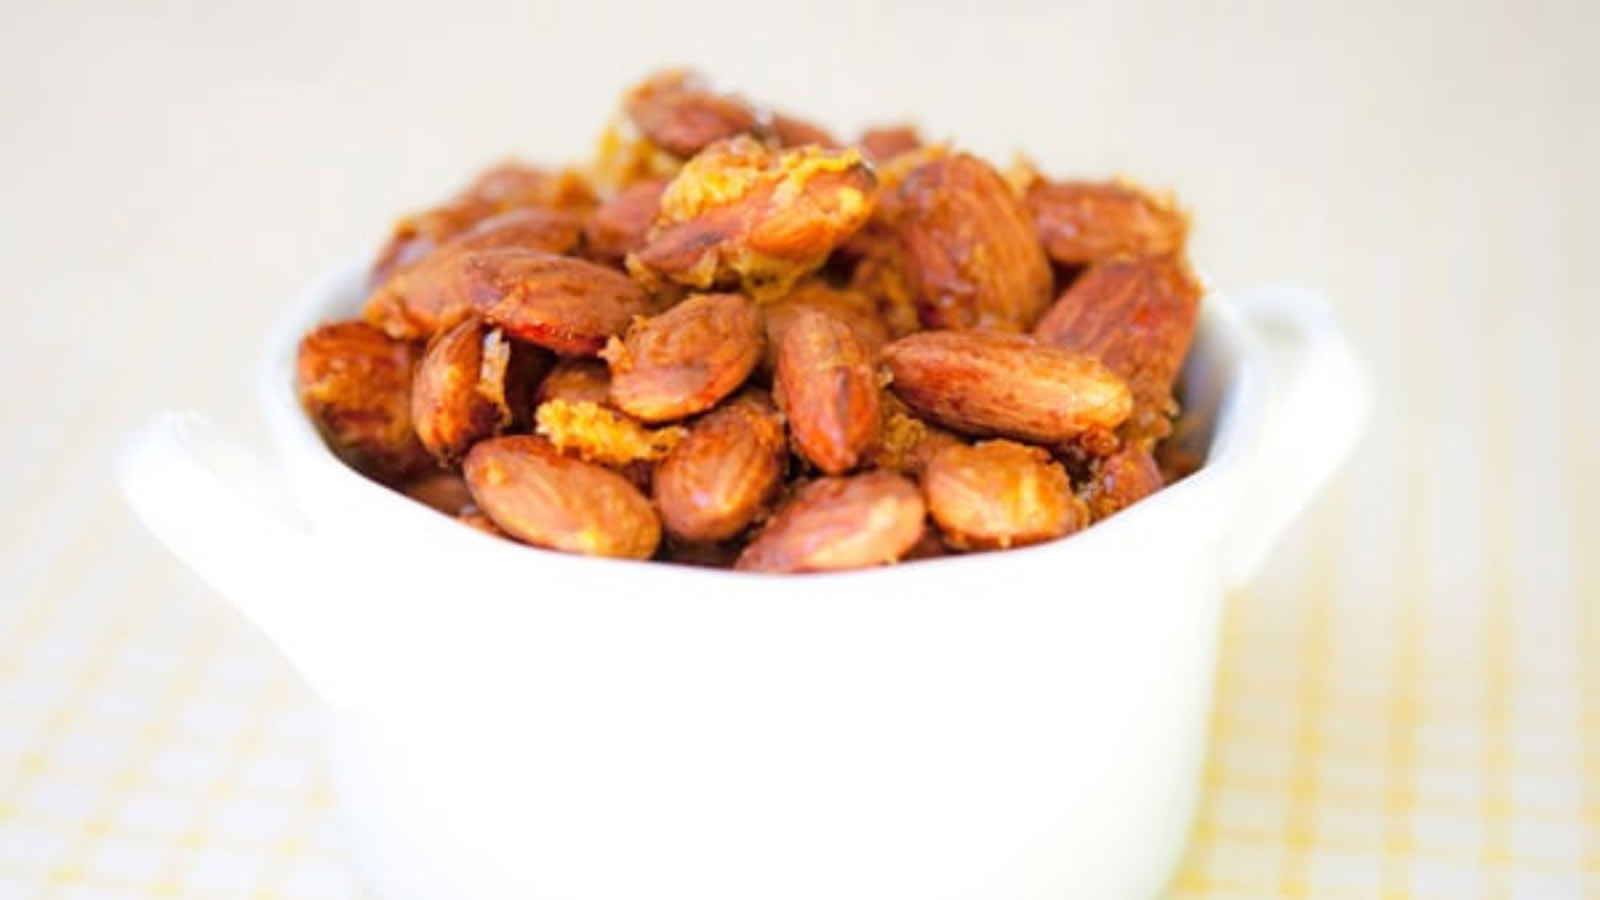 <p><a href="https://www.thegraciouspantry.com/clean-eating-lemon-honey-almonds/">Lemon and honey almonds</a> are a lightly sweet snack option with a surprising burst of bright lemon flavor. This protein-packed snack is always a hit, and it’s perfect for when you need a snack to go. Make a batch on the weekend and enjoy them for snacking all week long. </p>